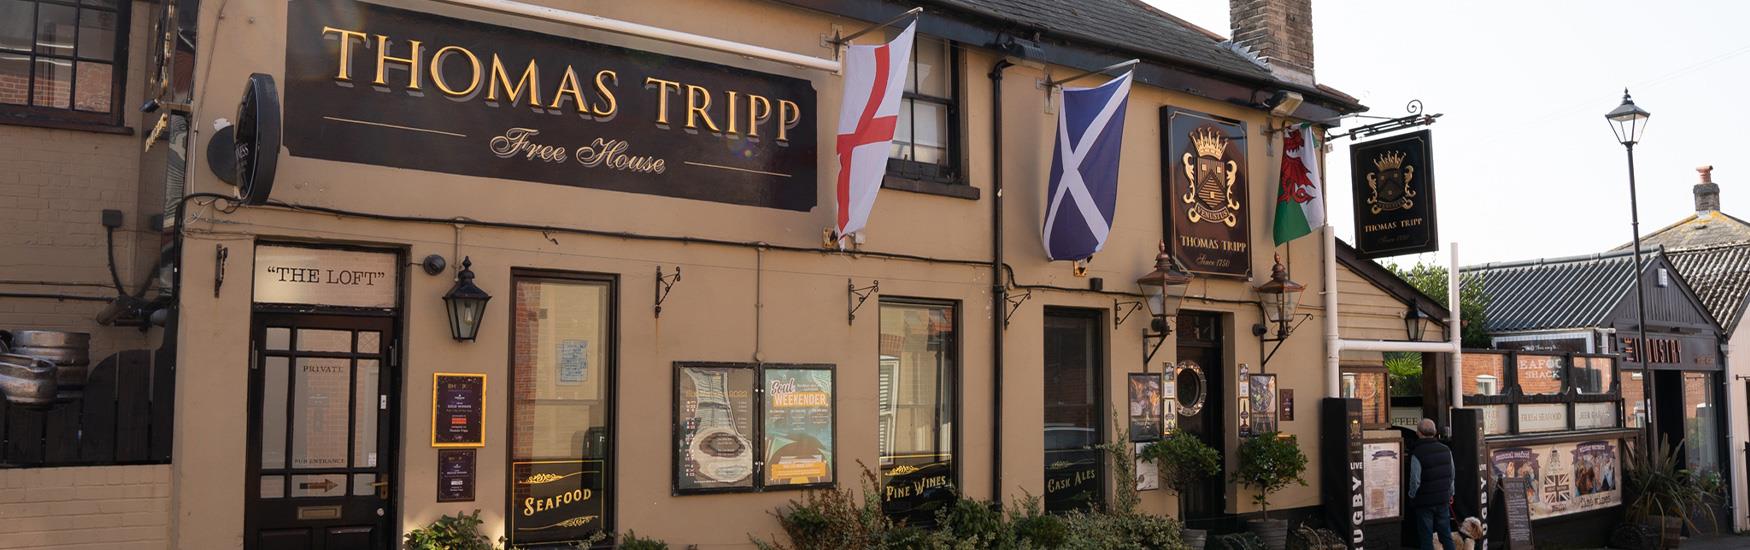 Exterior shot of the Thomas Tripp pub in christchurch with the rugby six nations flags handing up